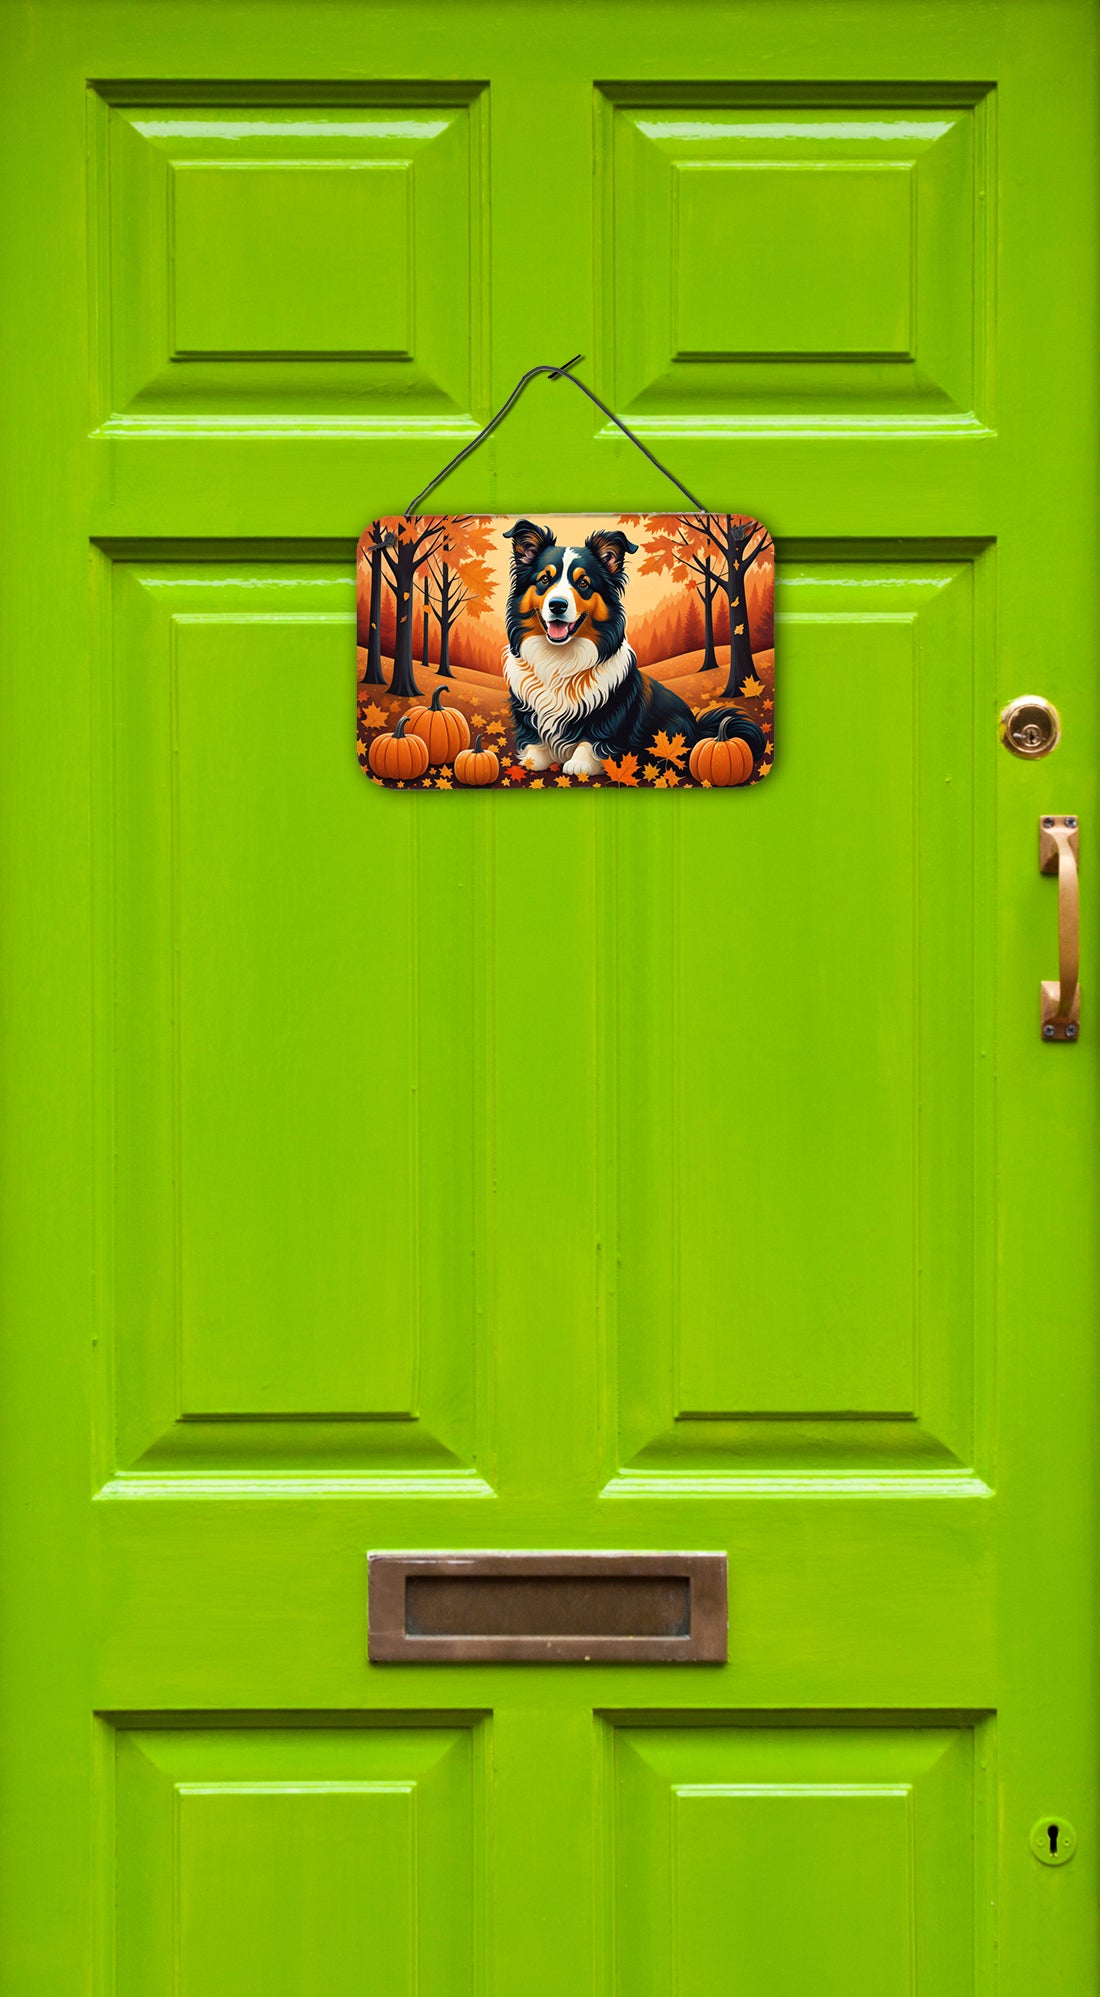 Buy this Collie Fall Wall or Door Hanging Prints